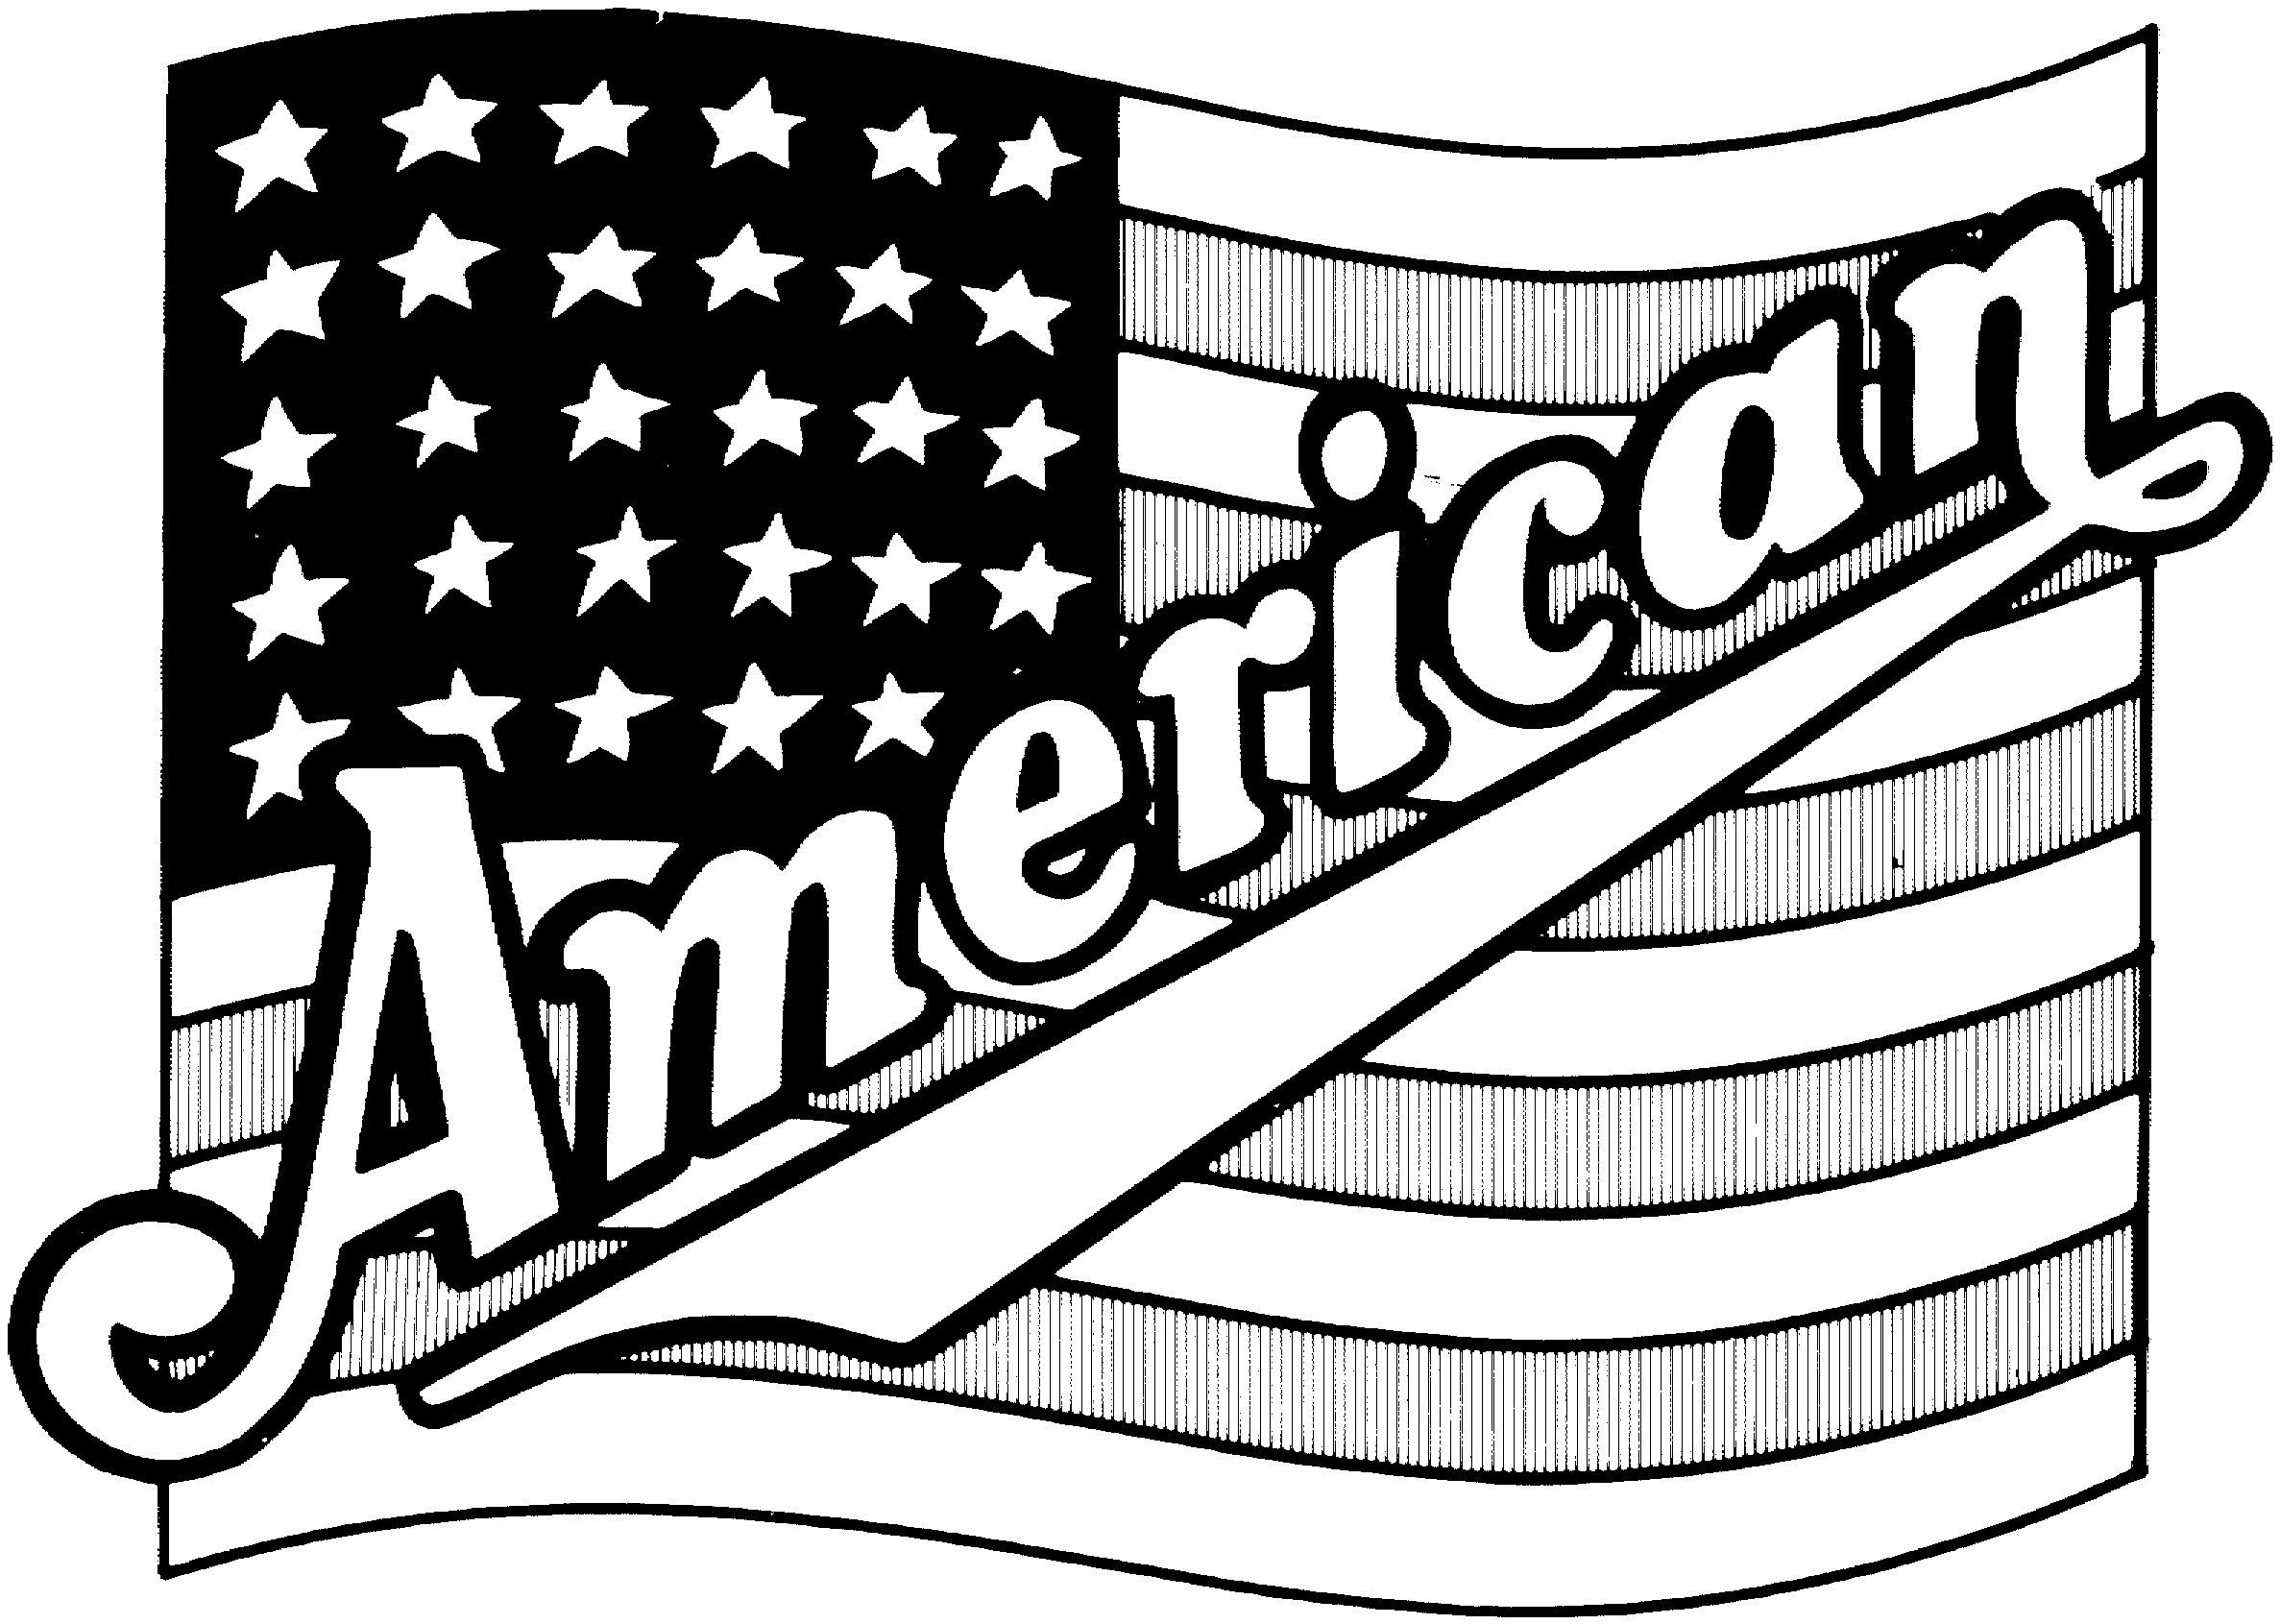 American flag coloring pages 2018- Z31 Coloring Page